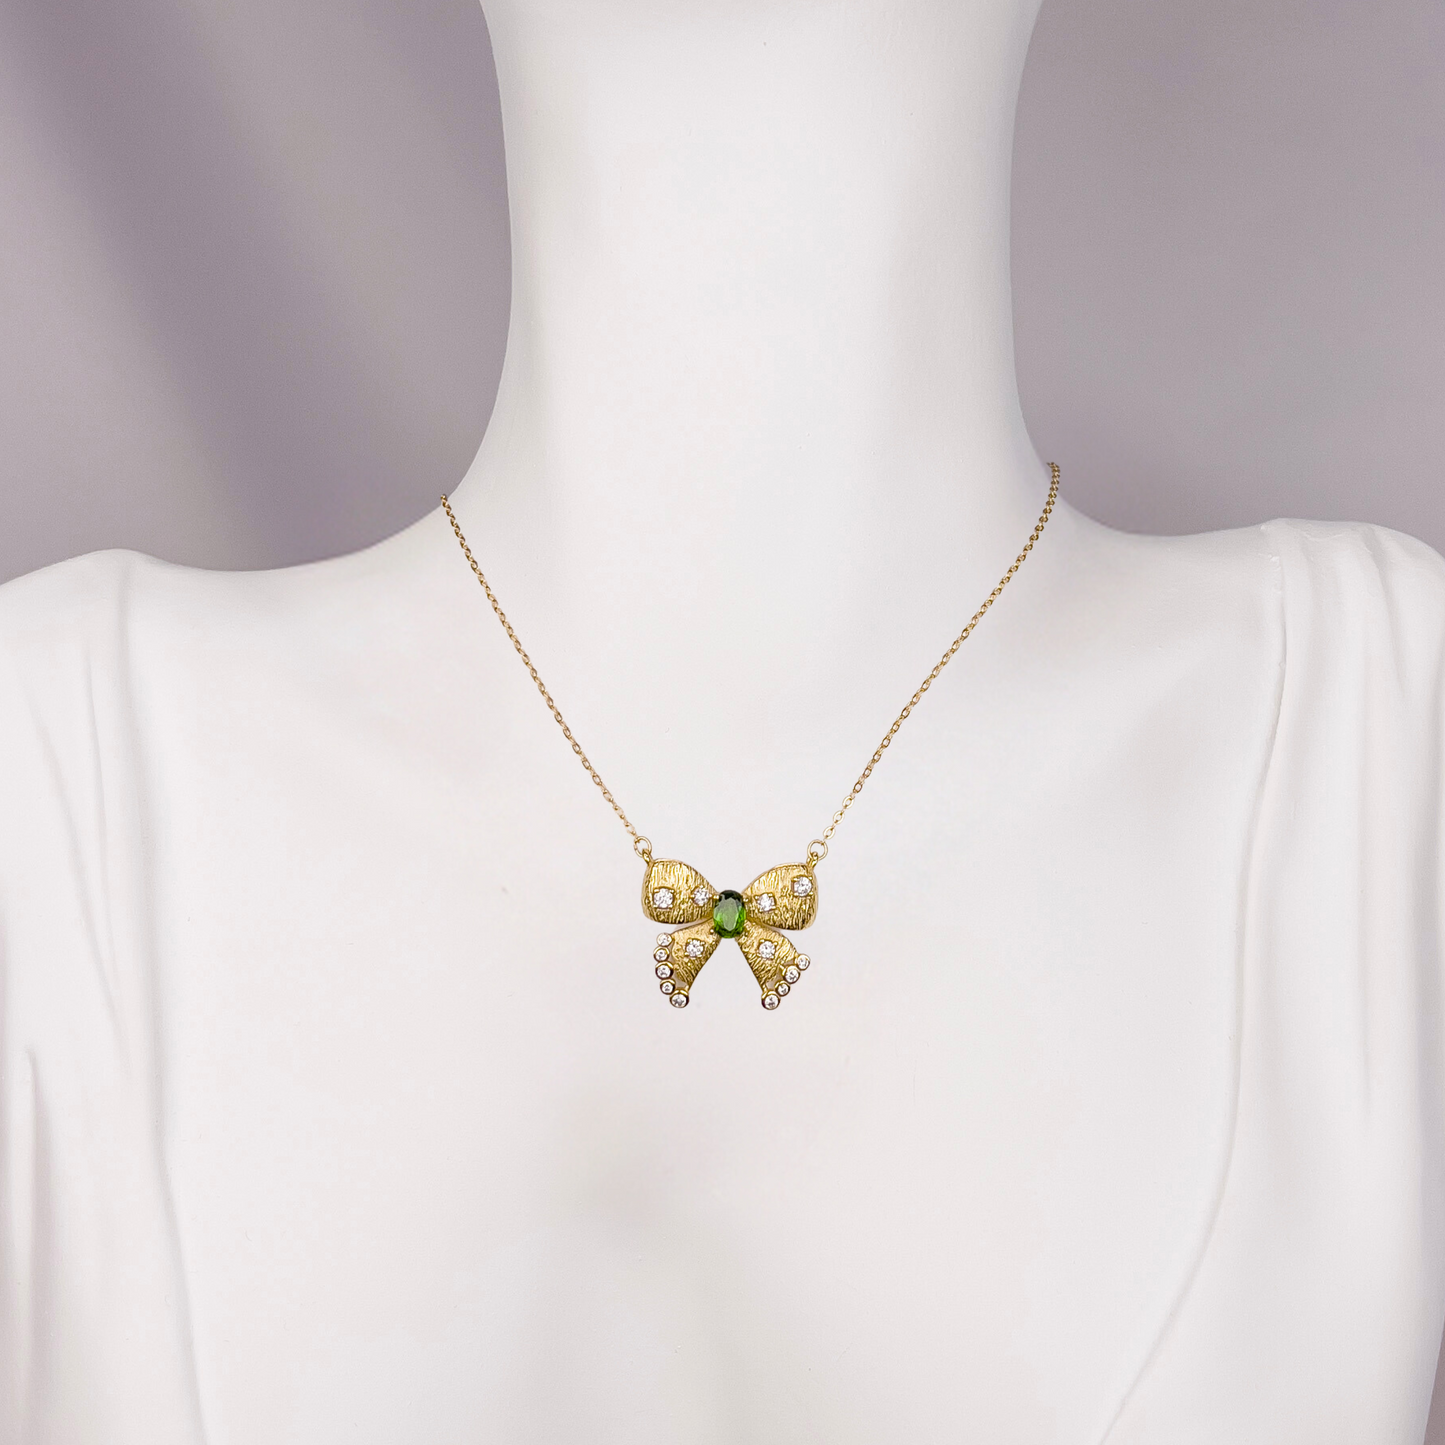 GEMOR Zircon Princess Necklace for Women | Butterfly Pendant Chain Necklace with Green Gemstone